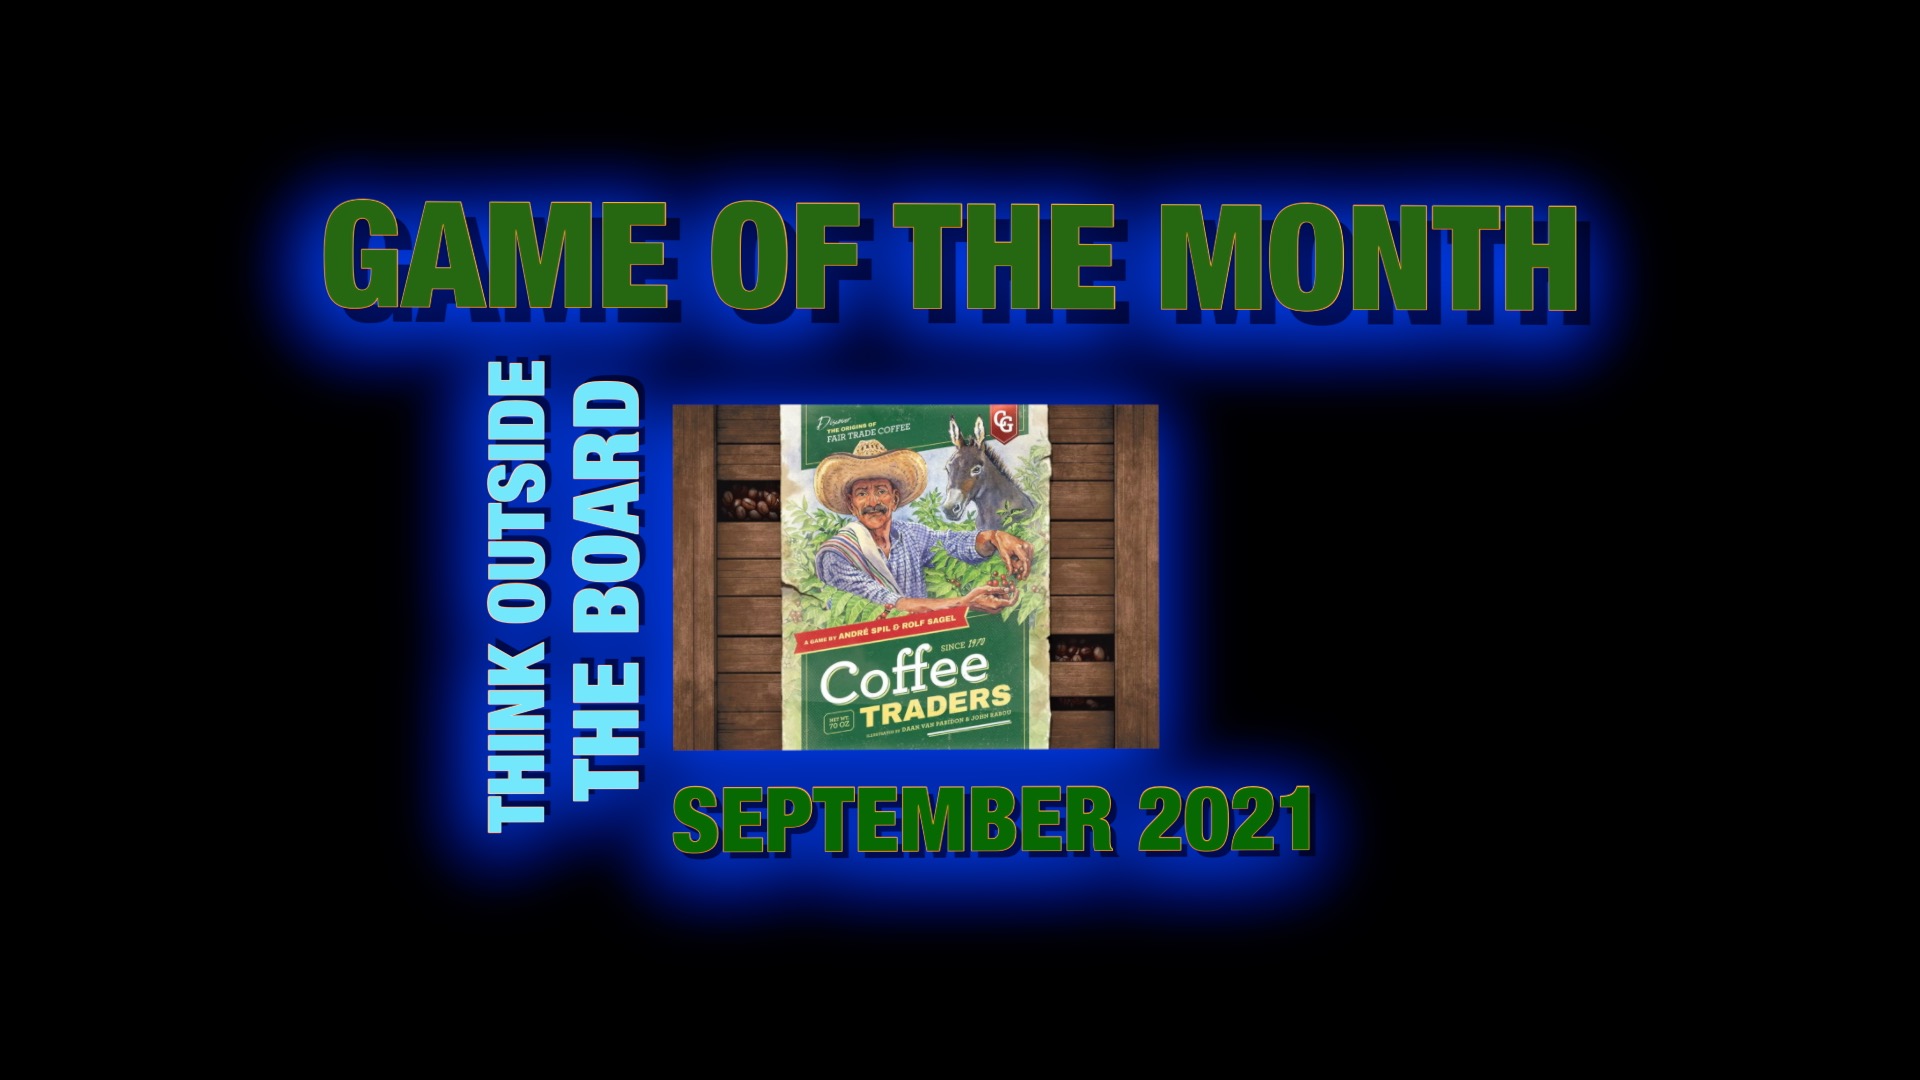 Game of the Month, September 2021